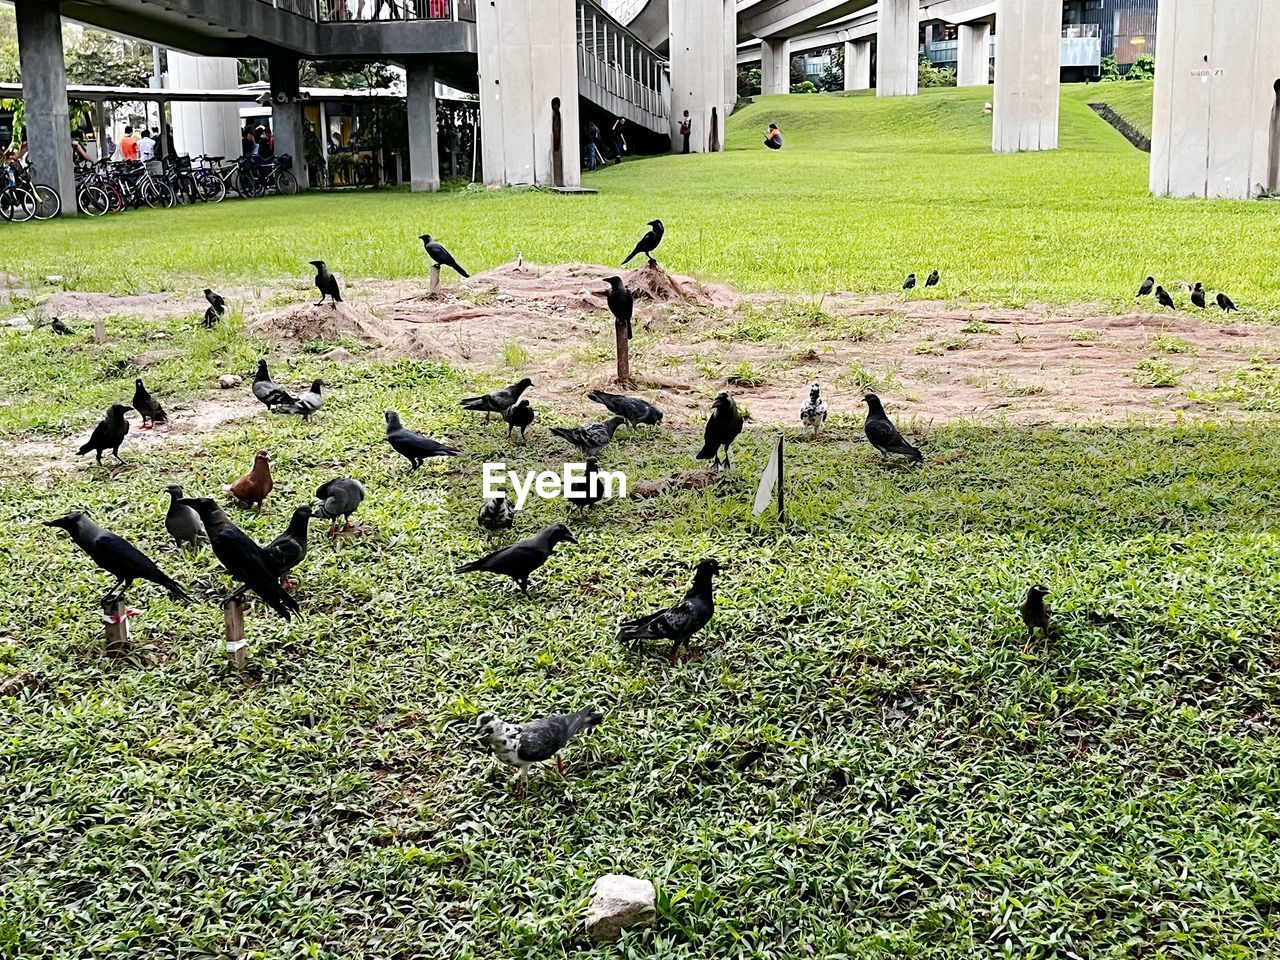 bird, animal, animal themes, grass, architecture, large group of animals, built structure, building exterior, group of animals, wildlife, animal wildlife, nature, day, green, lawn, plant, no people, building, flock of birds, outdoors, goose, sunlight, pigeon, field